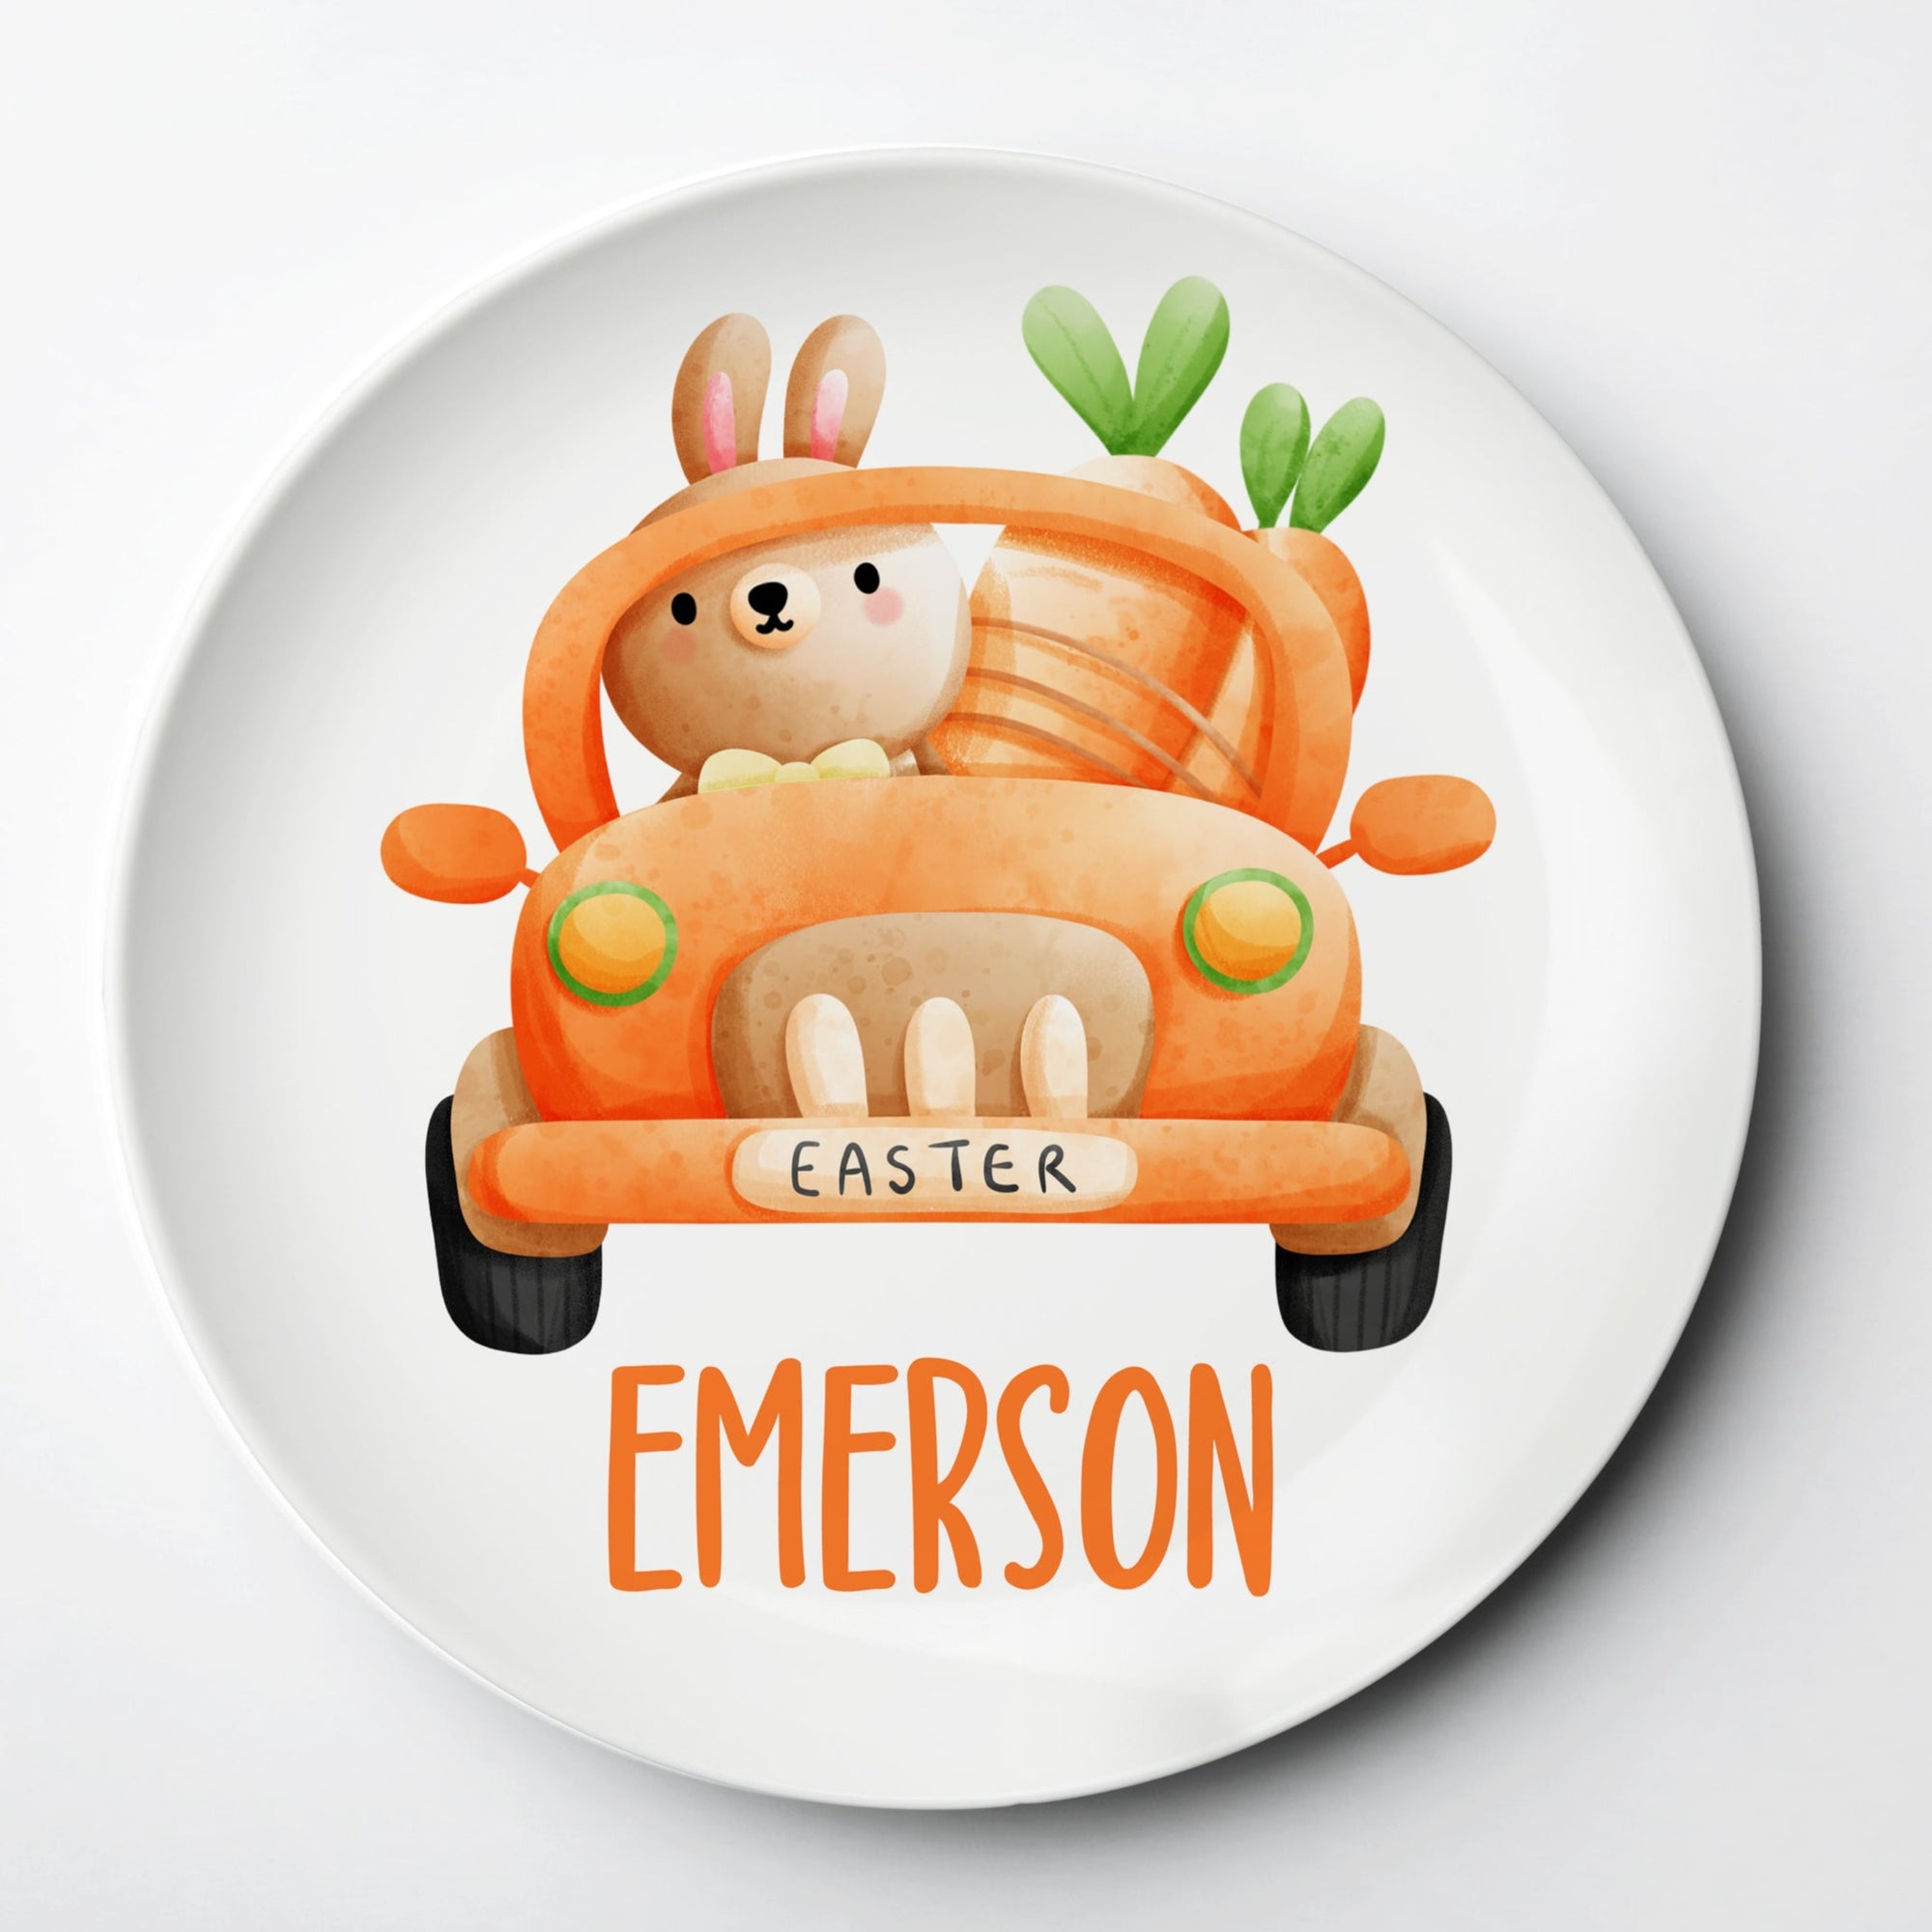 Personalized Easter Plate featuring the Easter Bunny in a Carrot Car, reusable plate will last for years